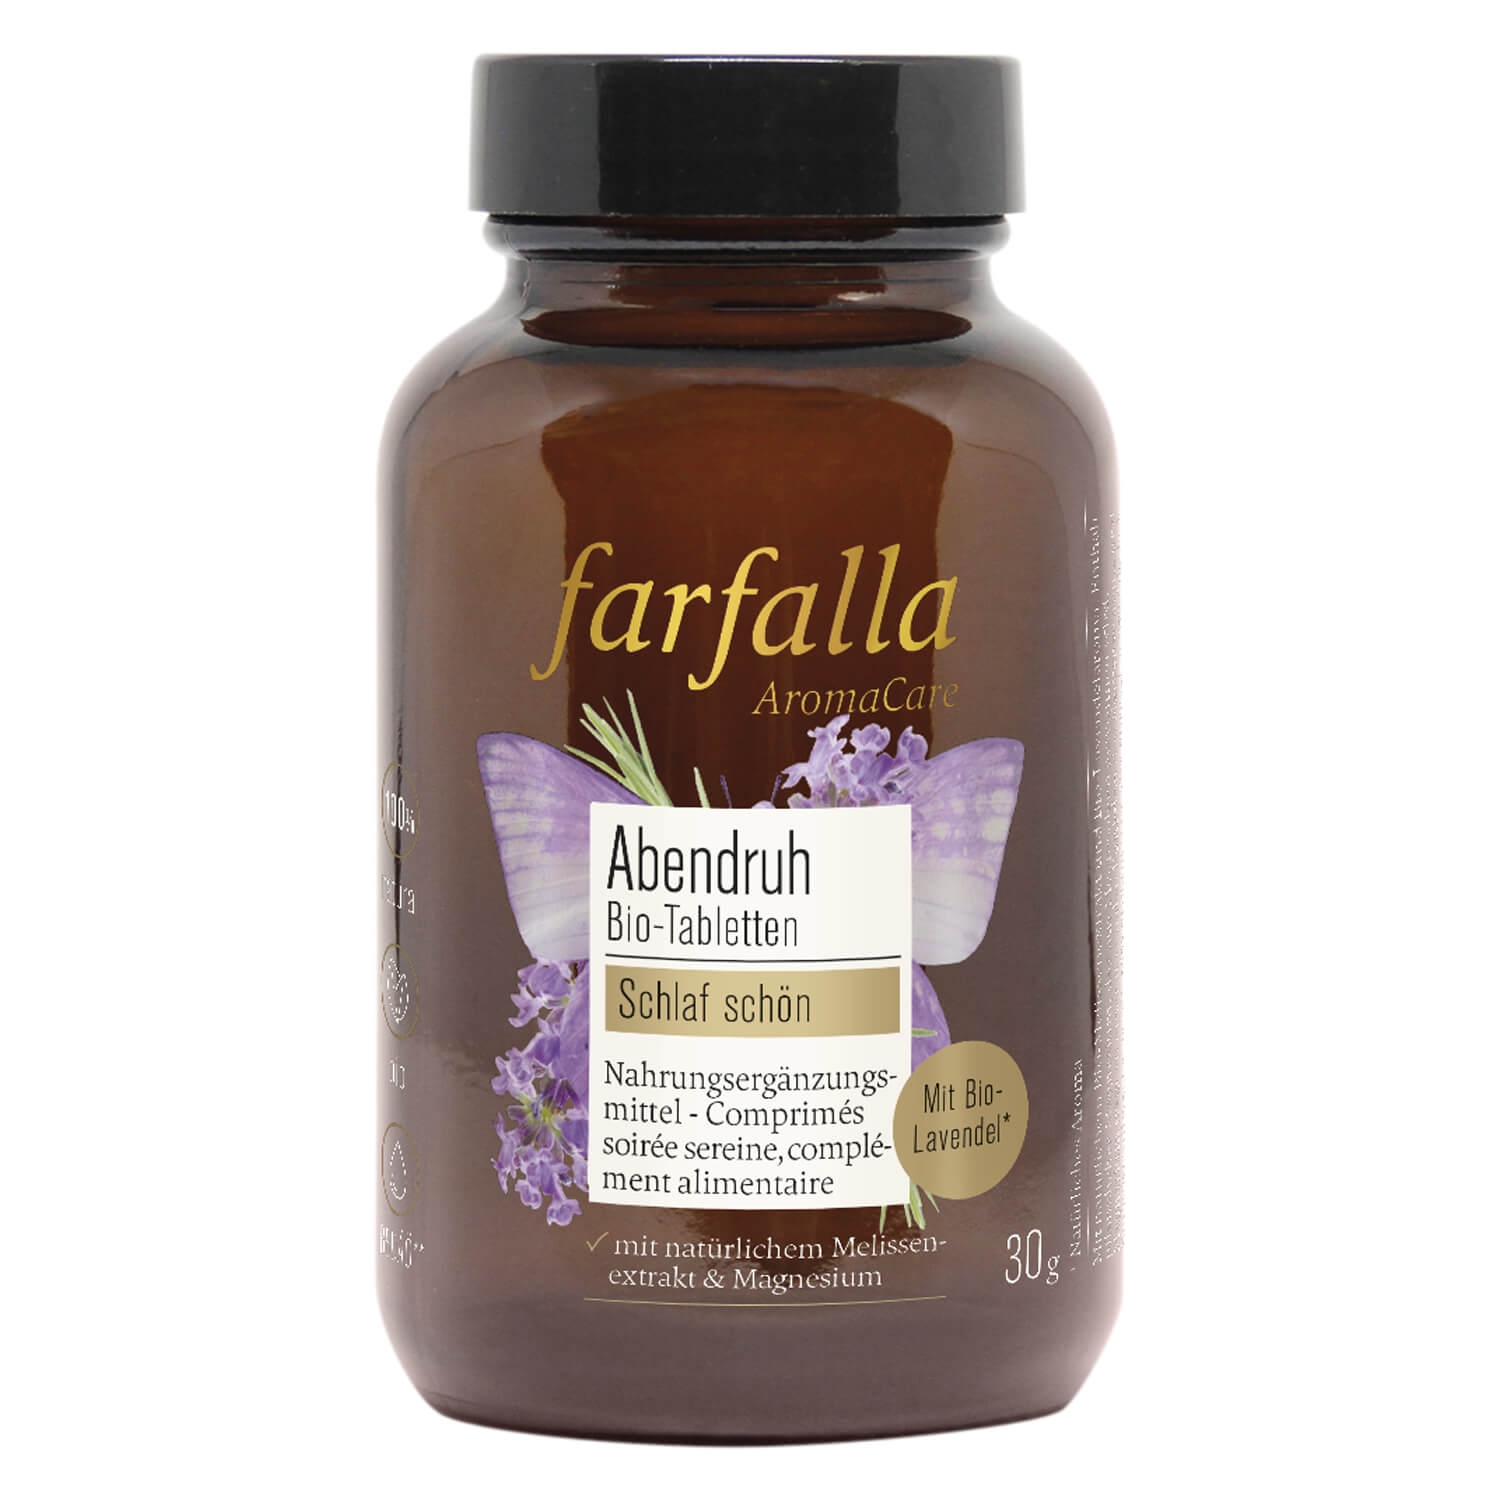 Product image from Farfalla Care - Schlaf schön Abendruh Bio-Tabletten